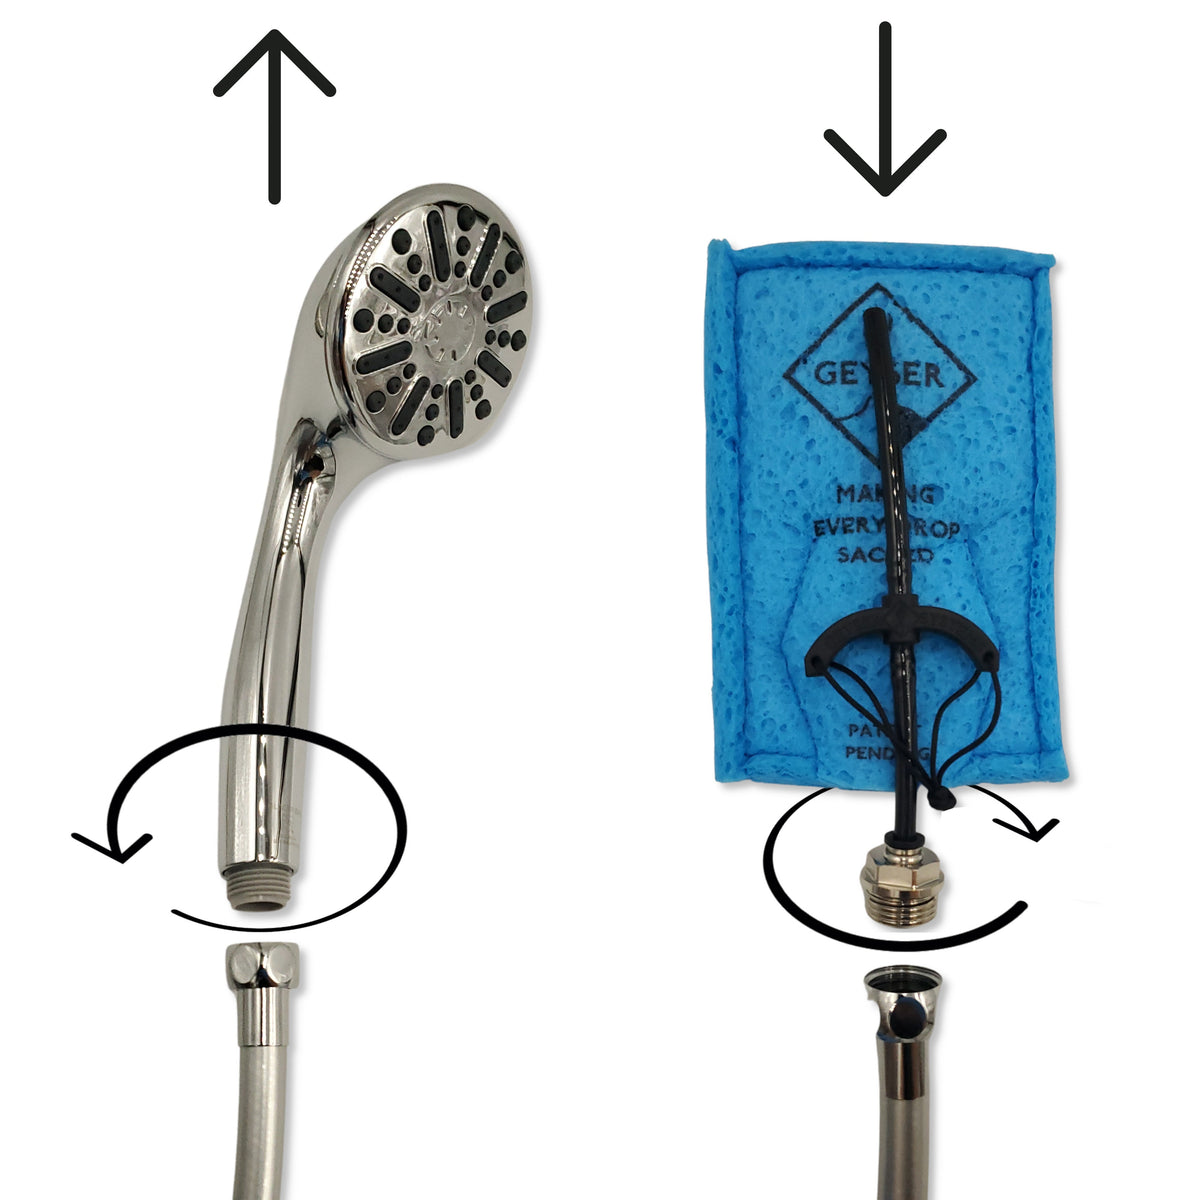 Ecohsower replaces your shower wand 